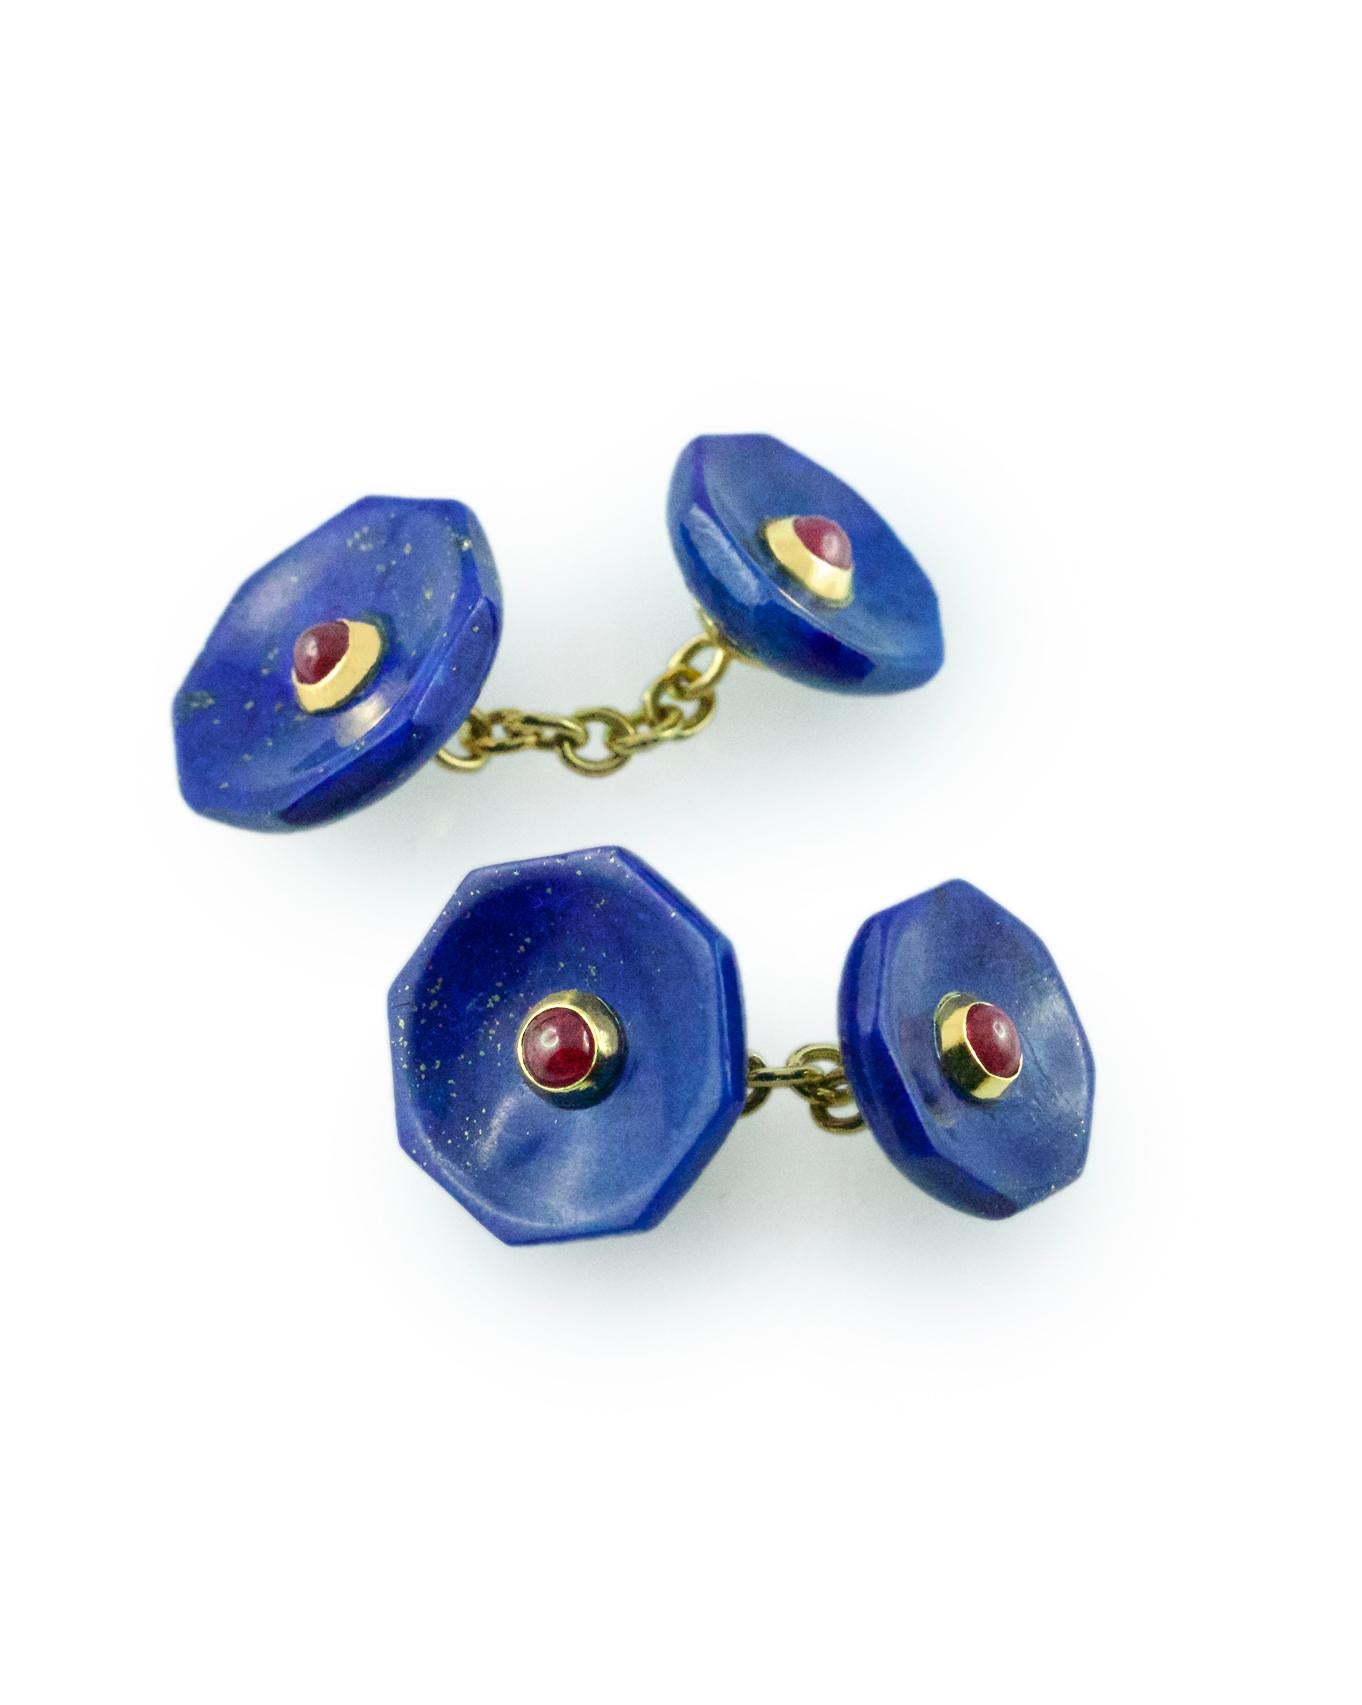 These cufflinks are both classic and bold and feature an octagonal front face and an identically shaped toggle, both made of lapis lazuli with a central decoration made of cabochon rubies that creates a striking color combination. The stones are